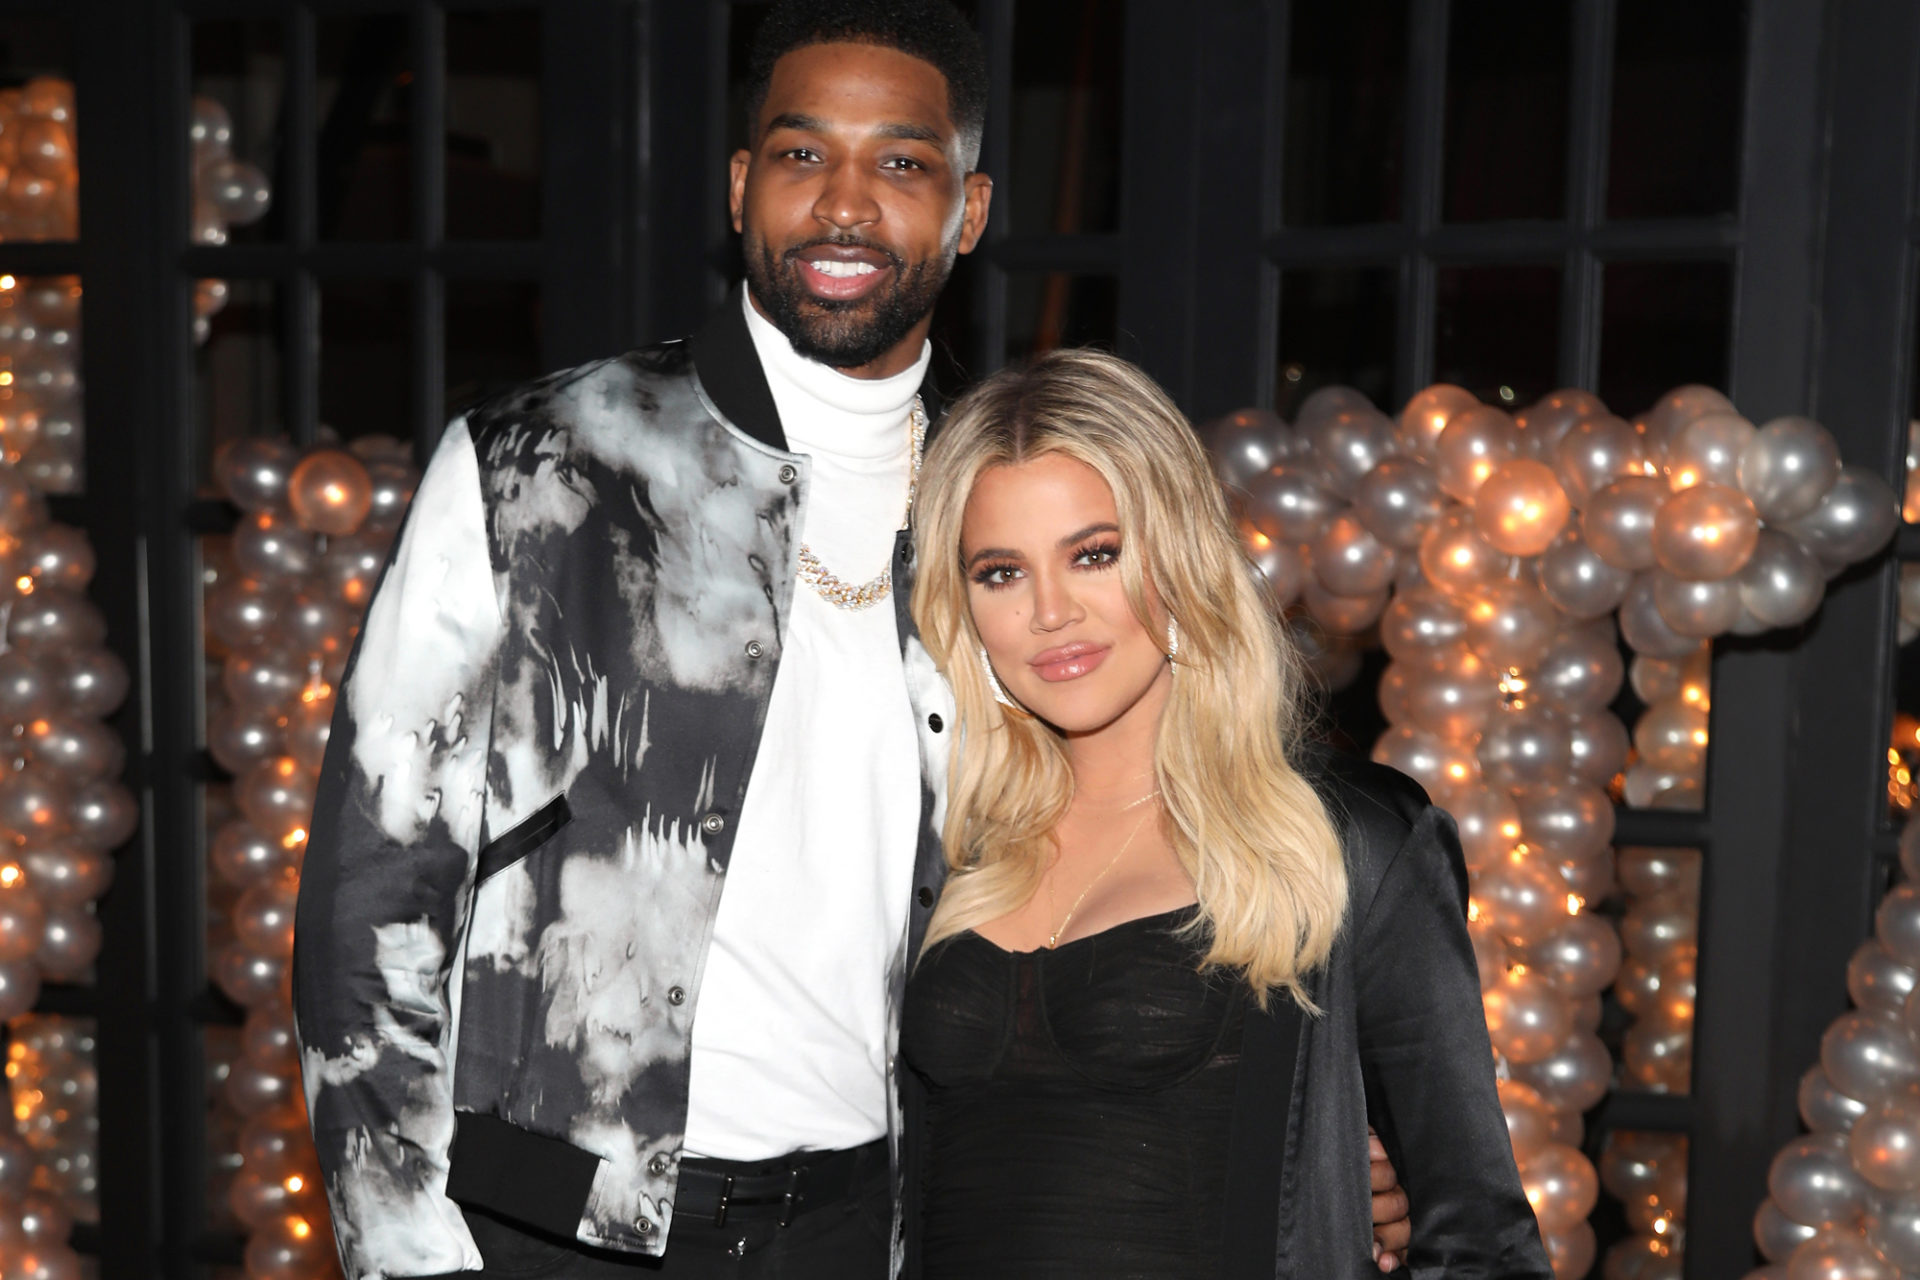 LOS ANGELES, CA - MARCH 10:  Tristan Thompson and Khloe Kardashian pose for a photo as Remy Martin celebrates Tristan Thompson's Birthday at Beauty